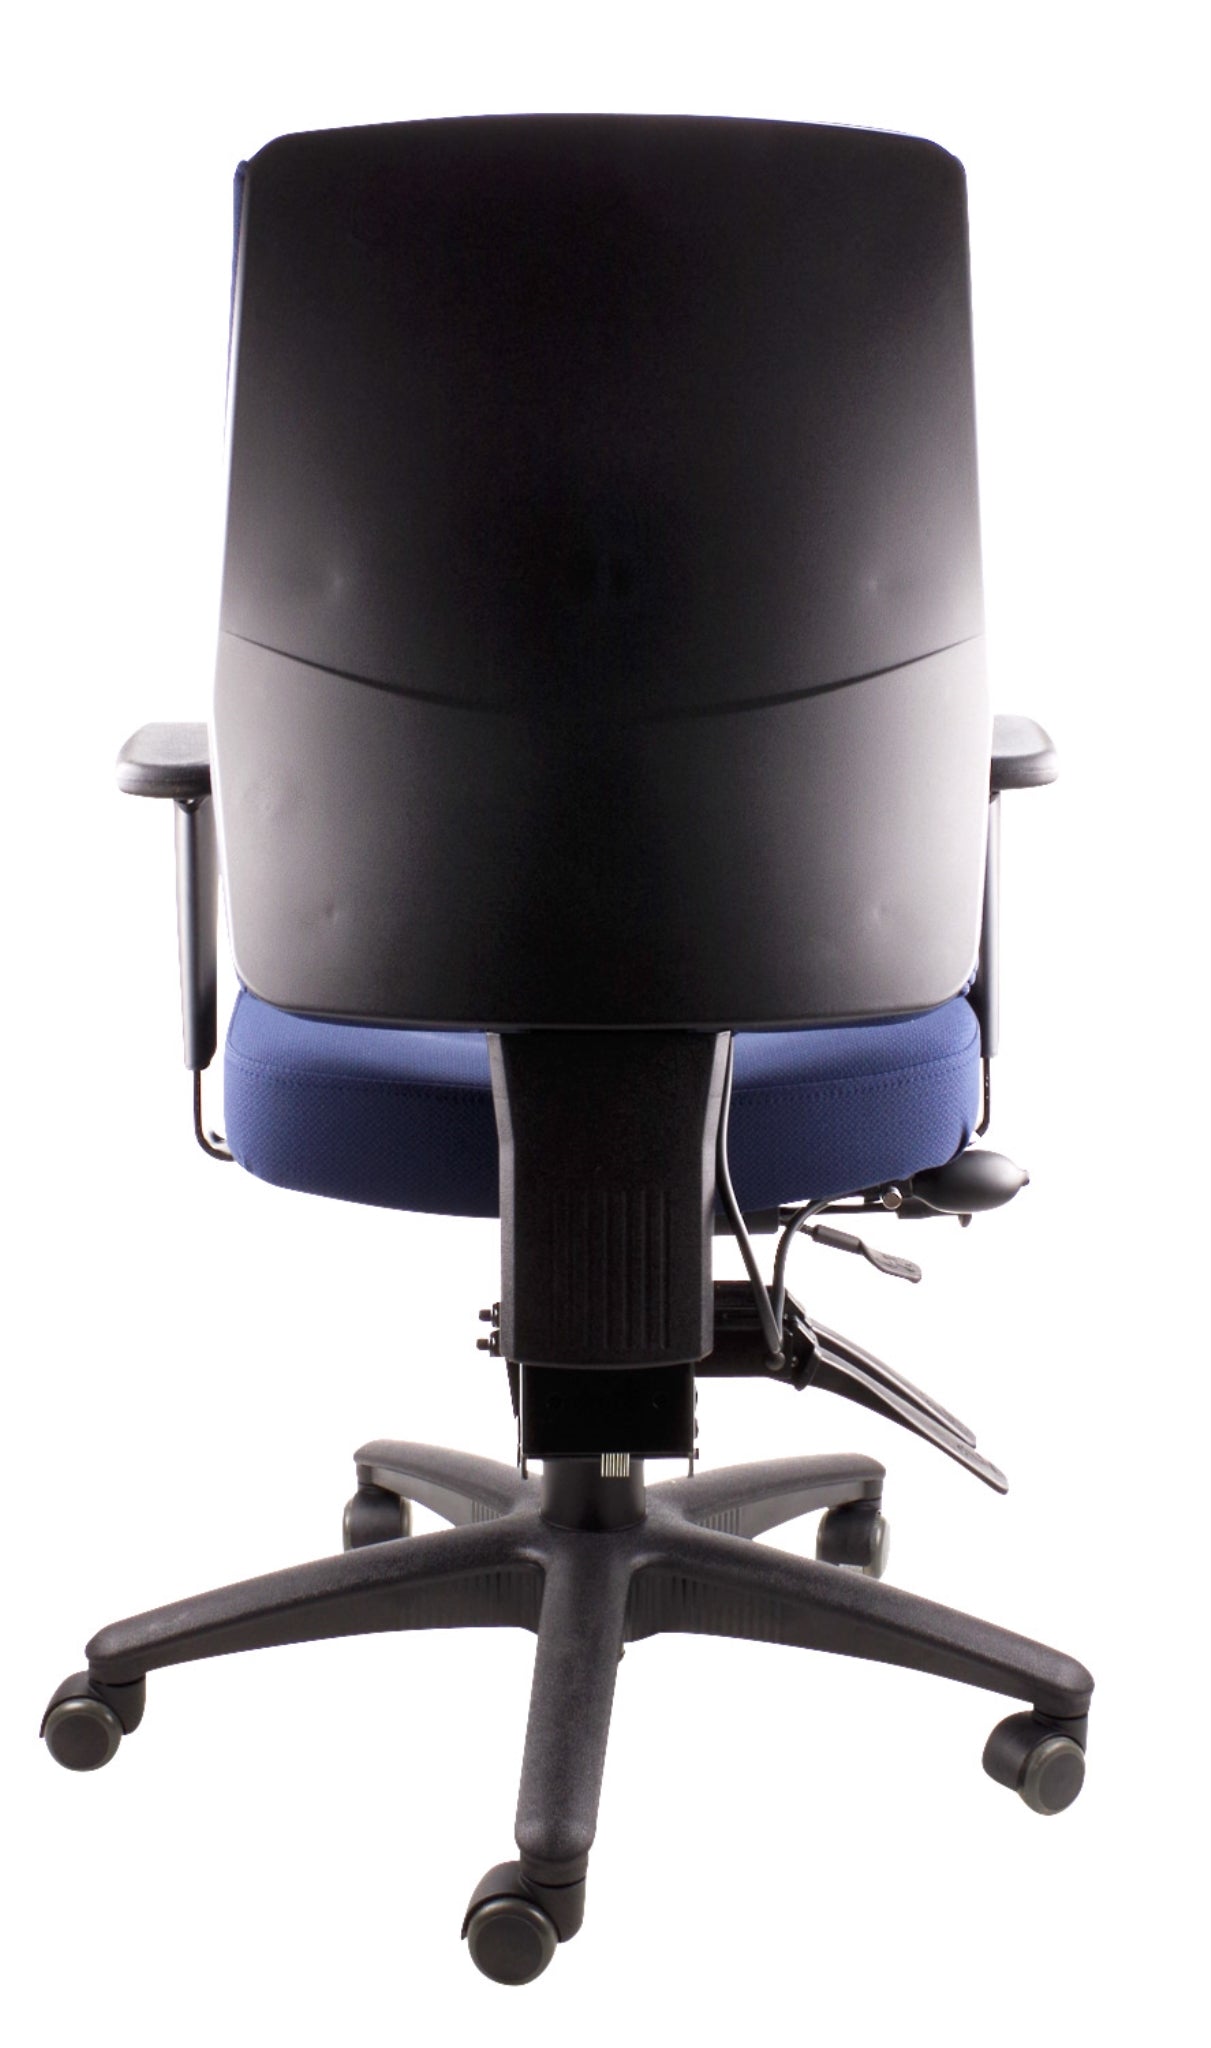 Buy Quality Ergo Air Ergonomic Office Desk Chair Now with FREE SHIPPING Navy